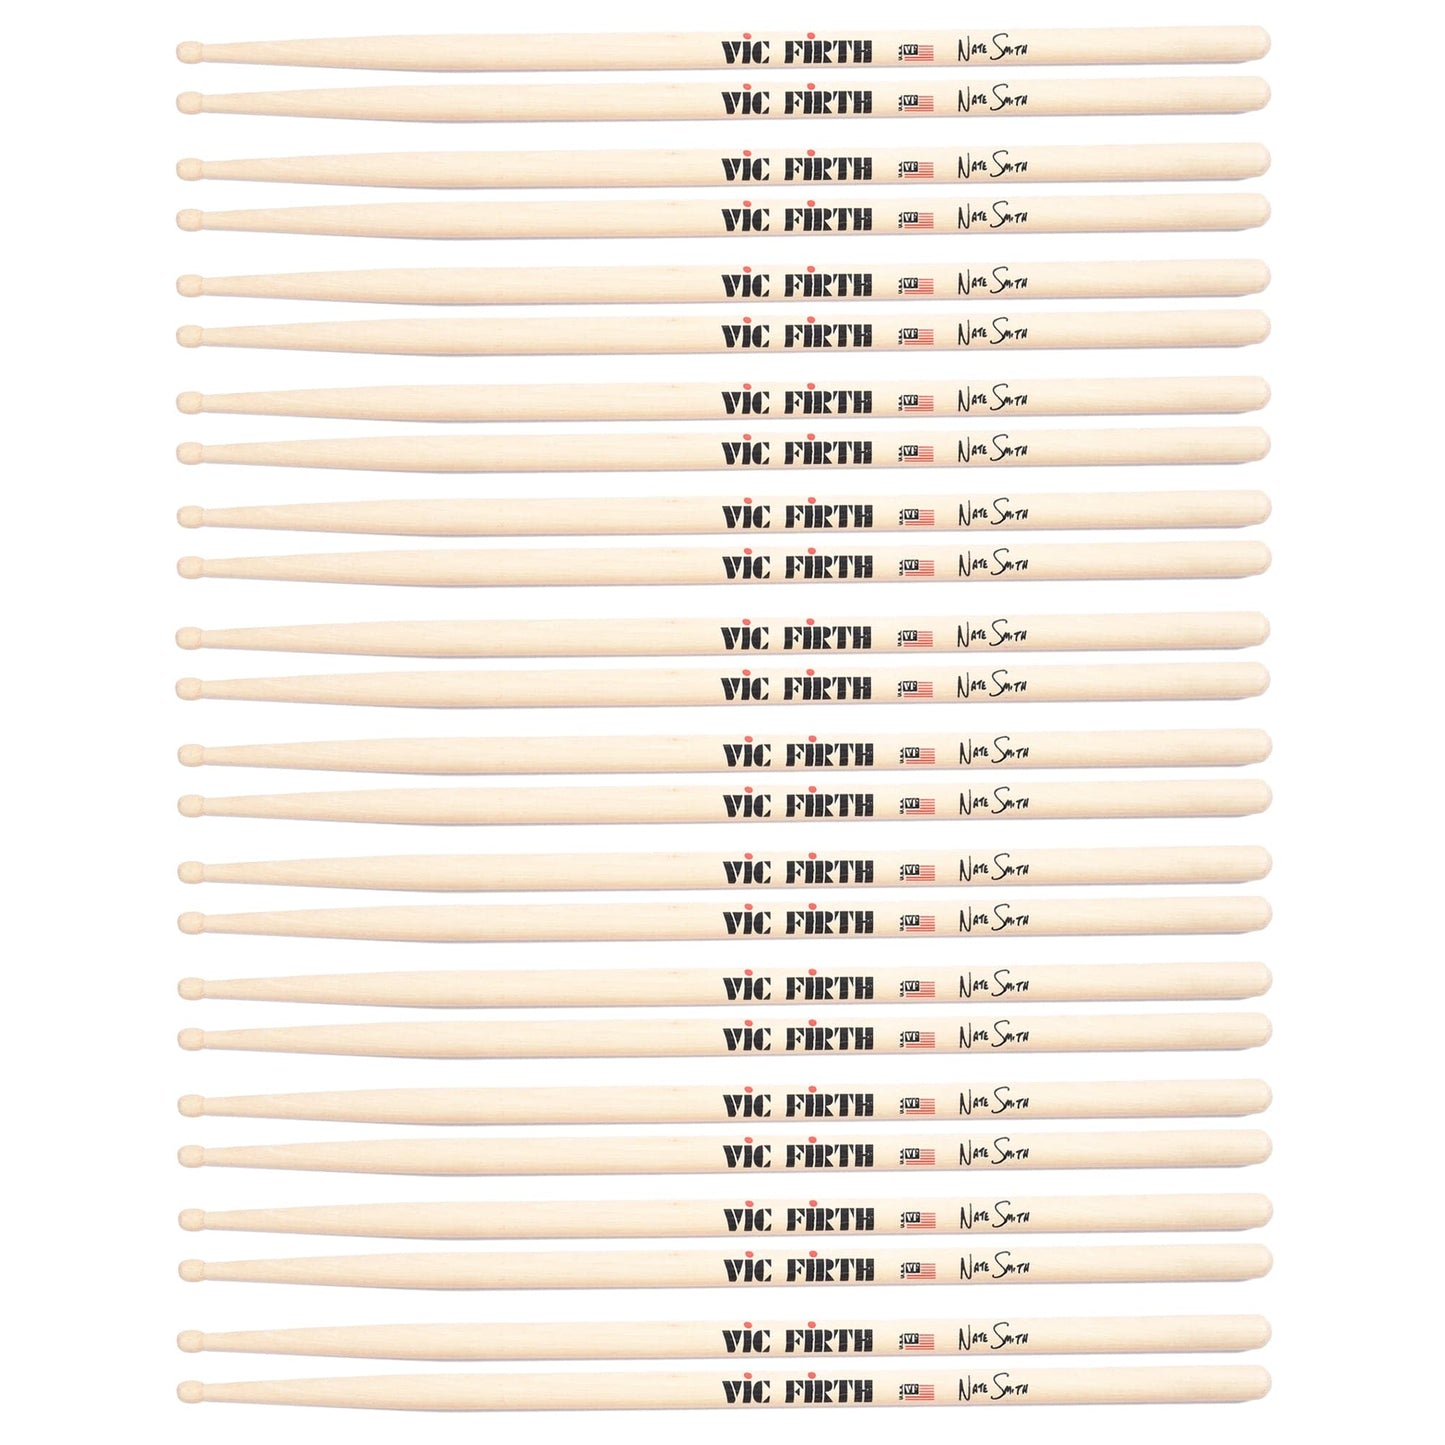 Vic Firth Nate Smith Signature Drum Sticks 12 Pack Bundle Drums and Percussion / Parts and Accessories / Drum Sticks and Mallets